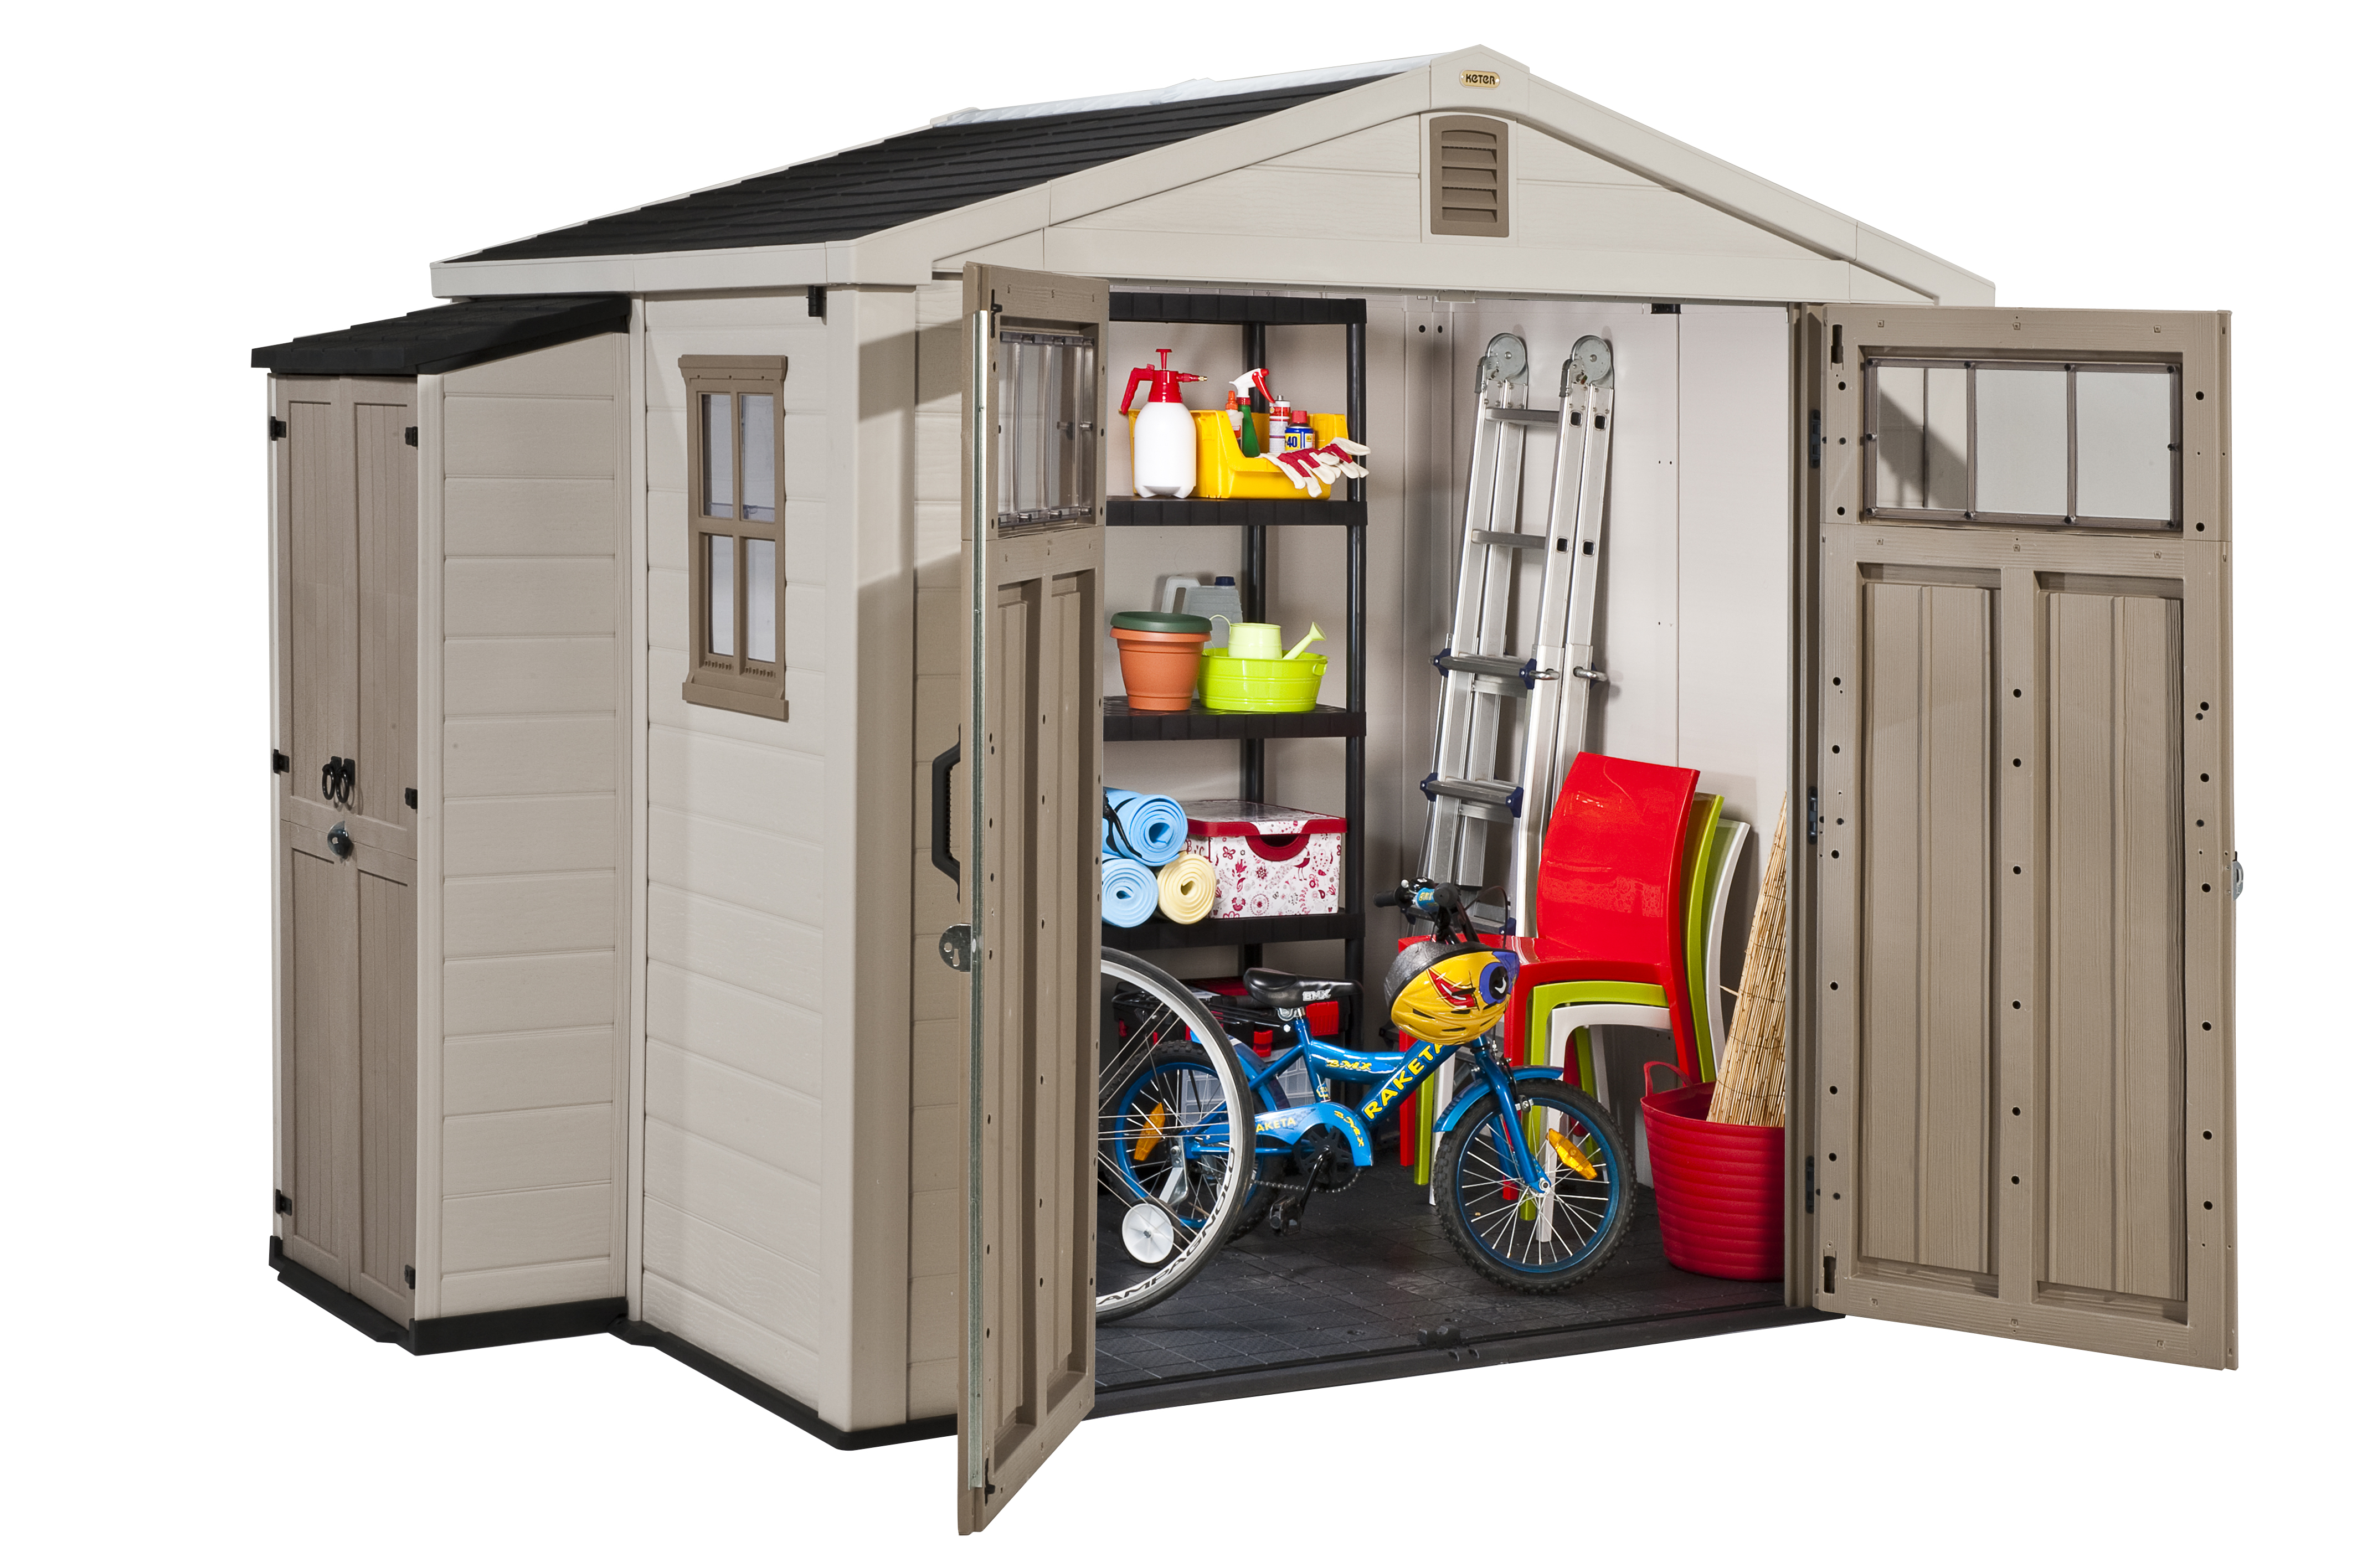 Lifetime products storage shed (8x10) product info. 